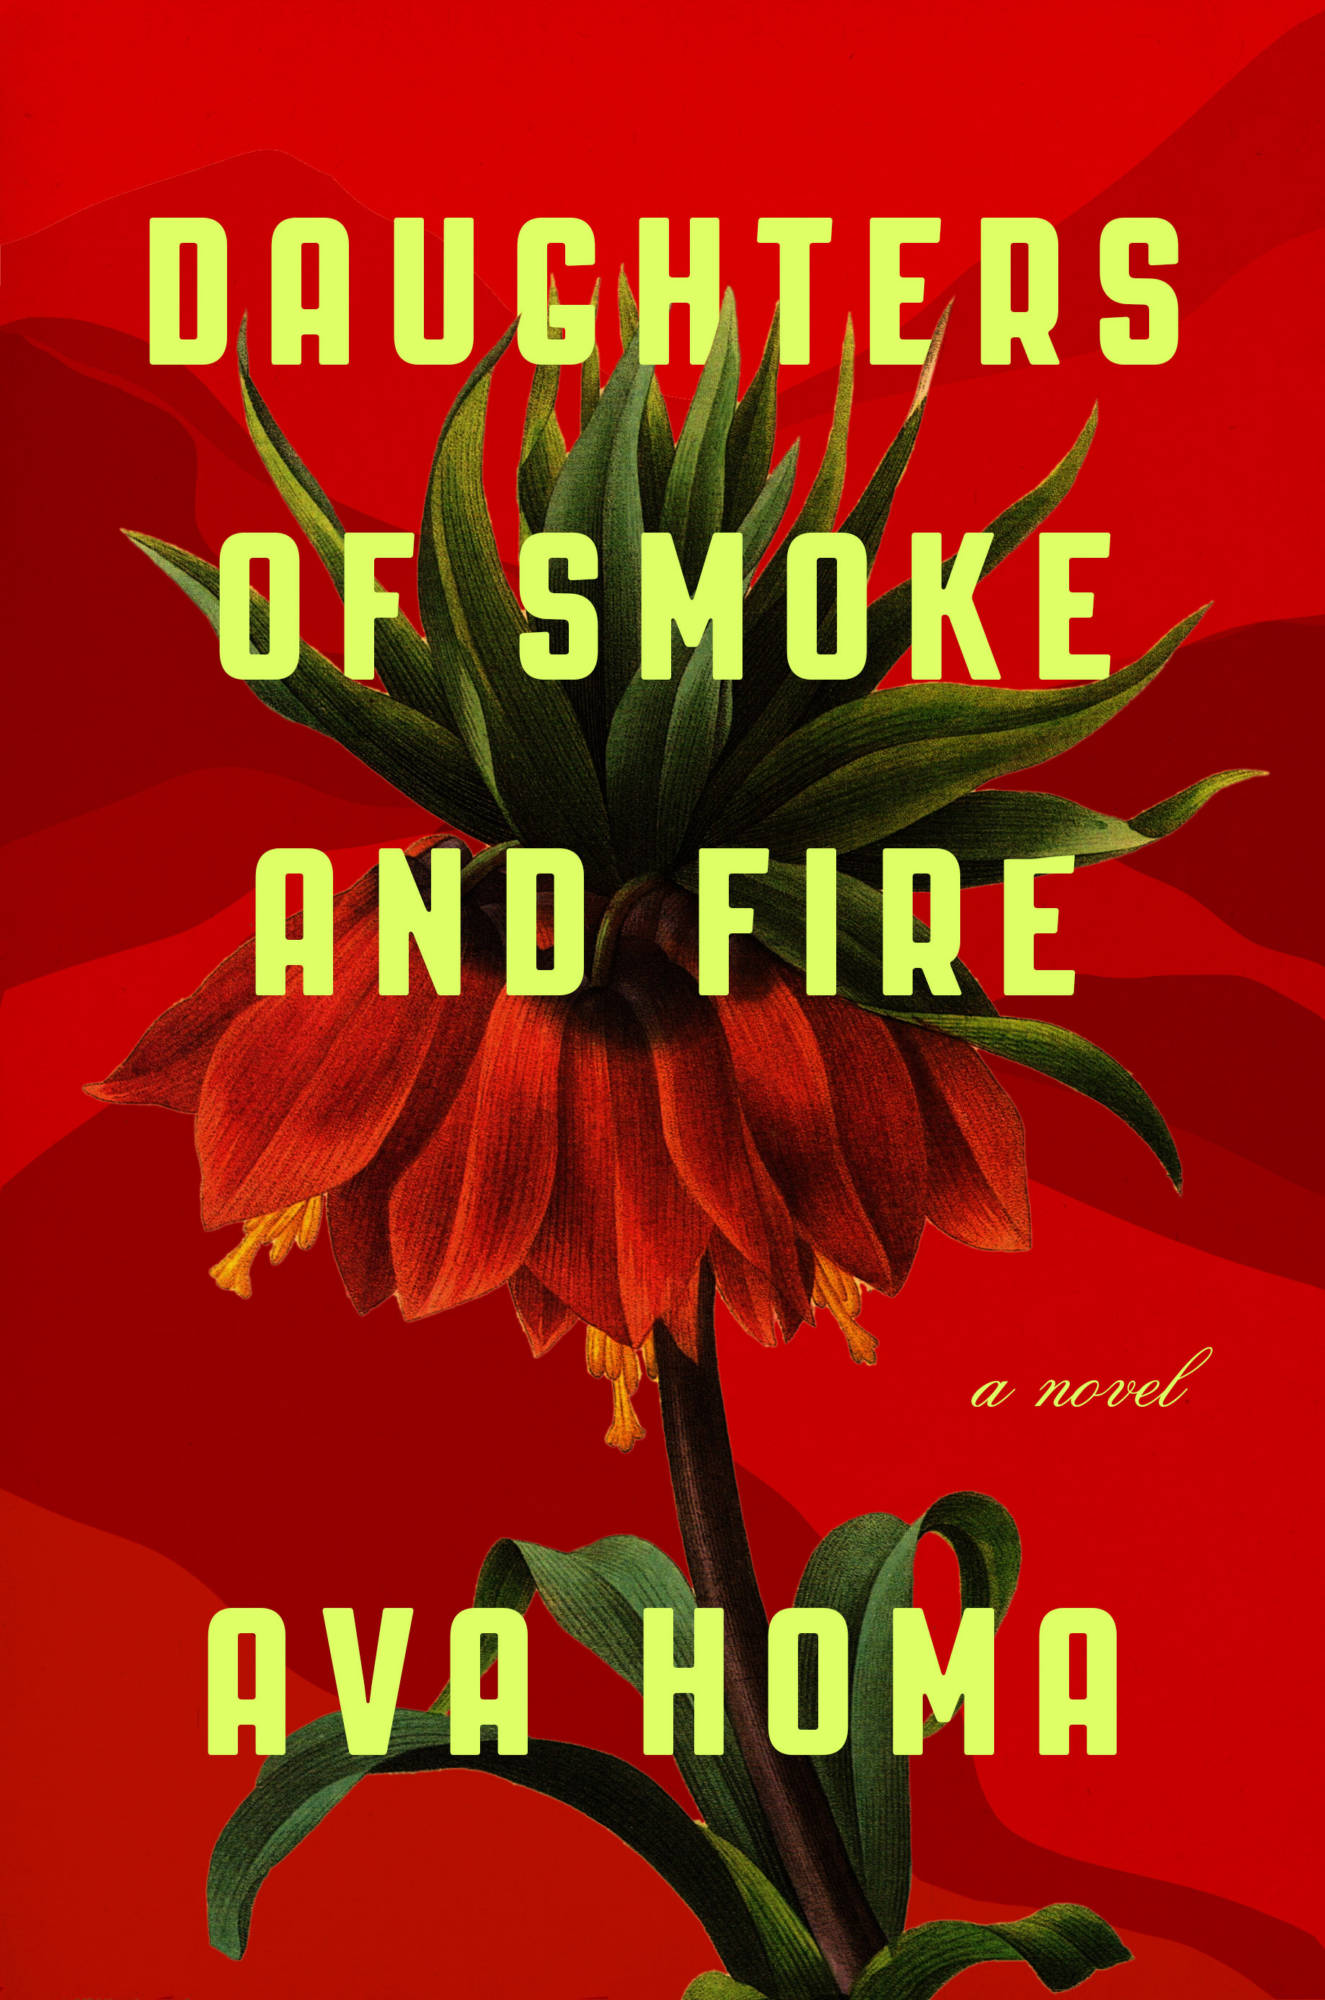 Cover of Ava Homa's "Daughters of Smoke and Fire" (published by abrams&amp;chronicle)